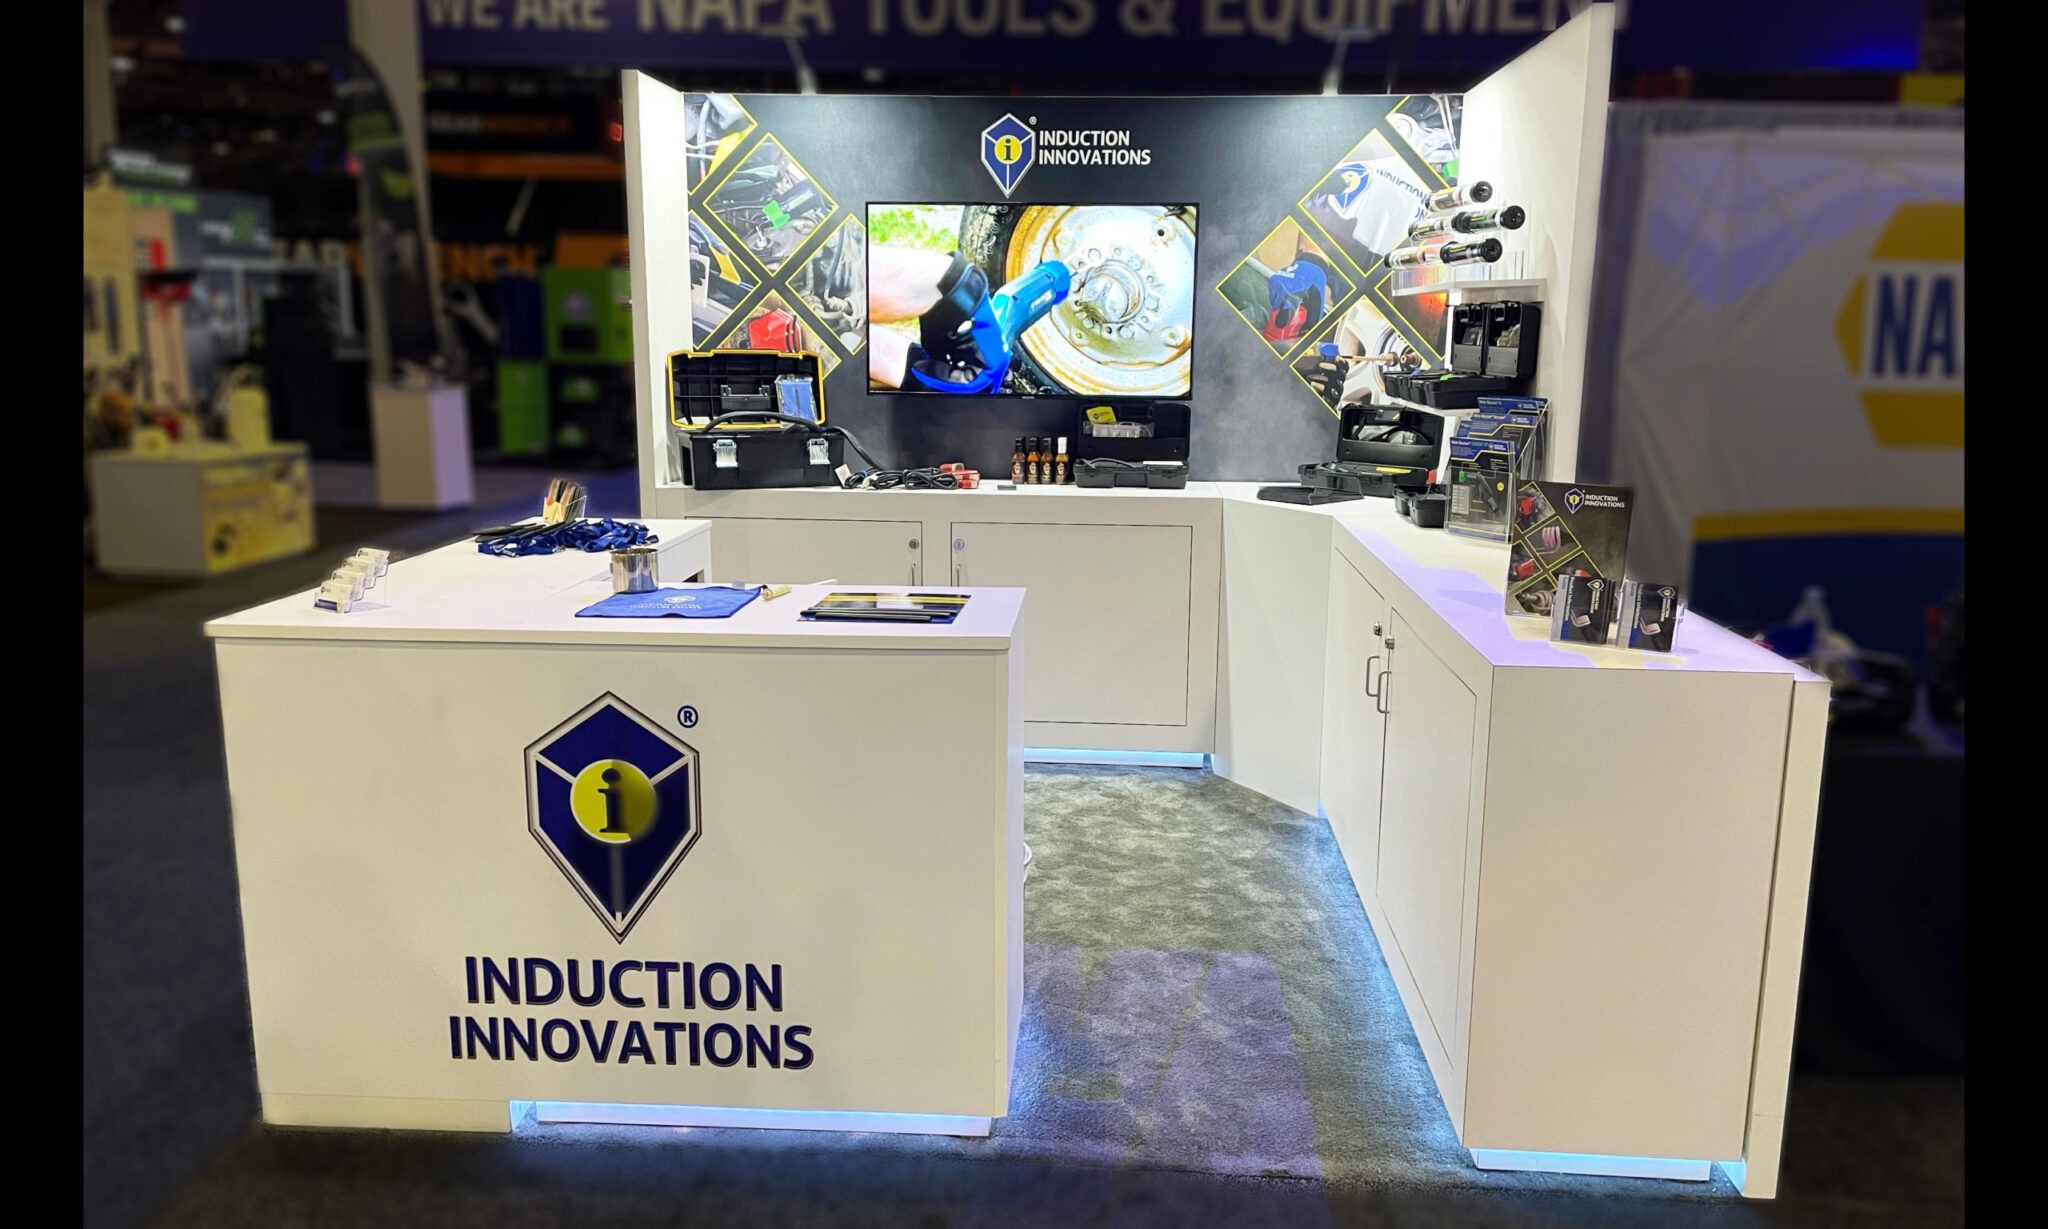 Induction Innovations